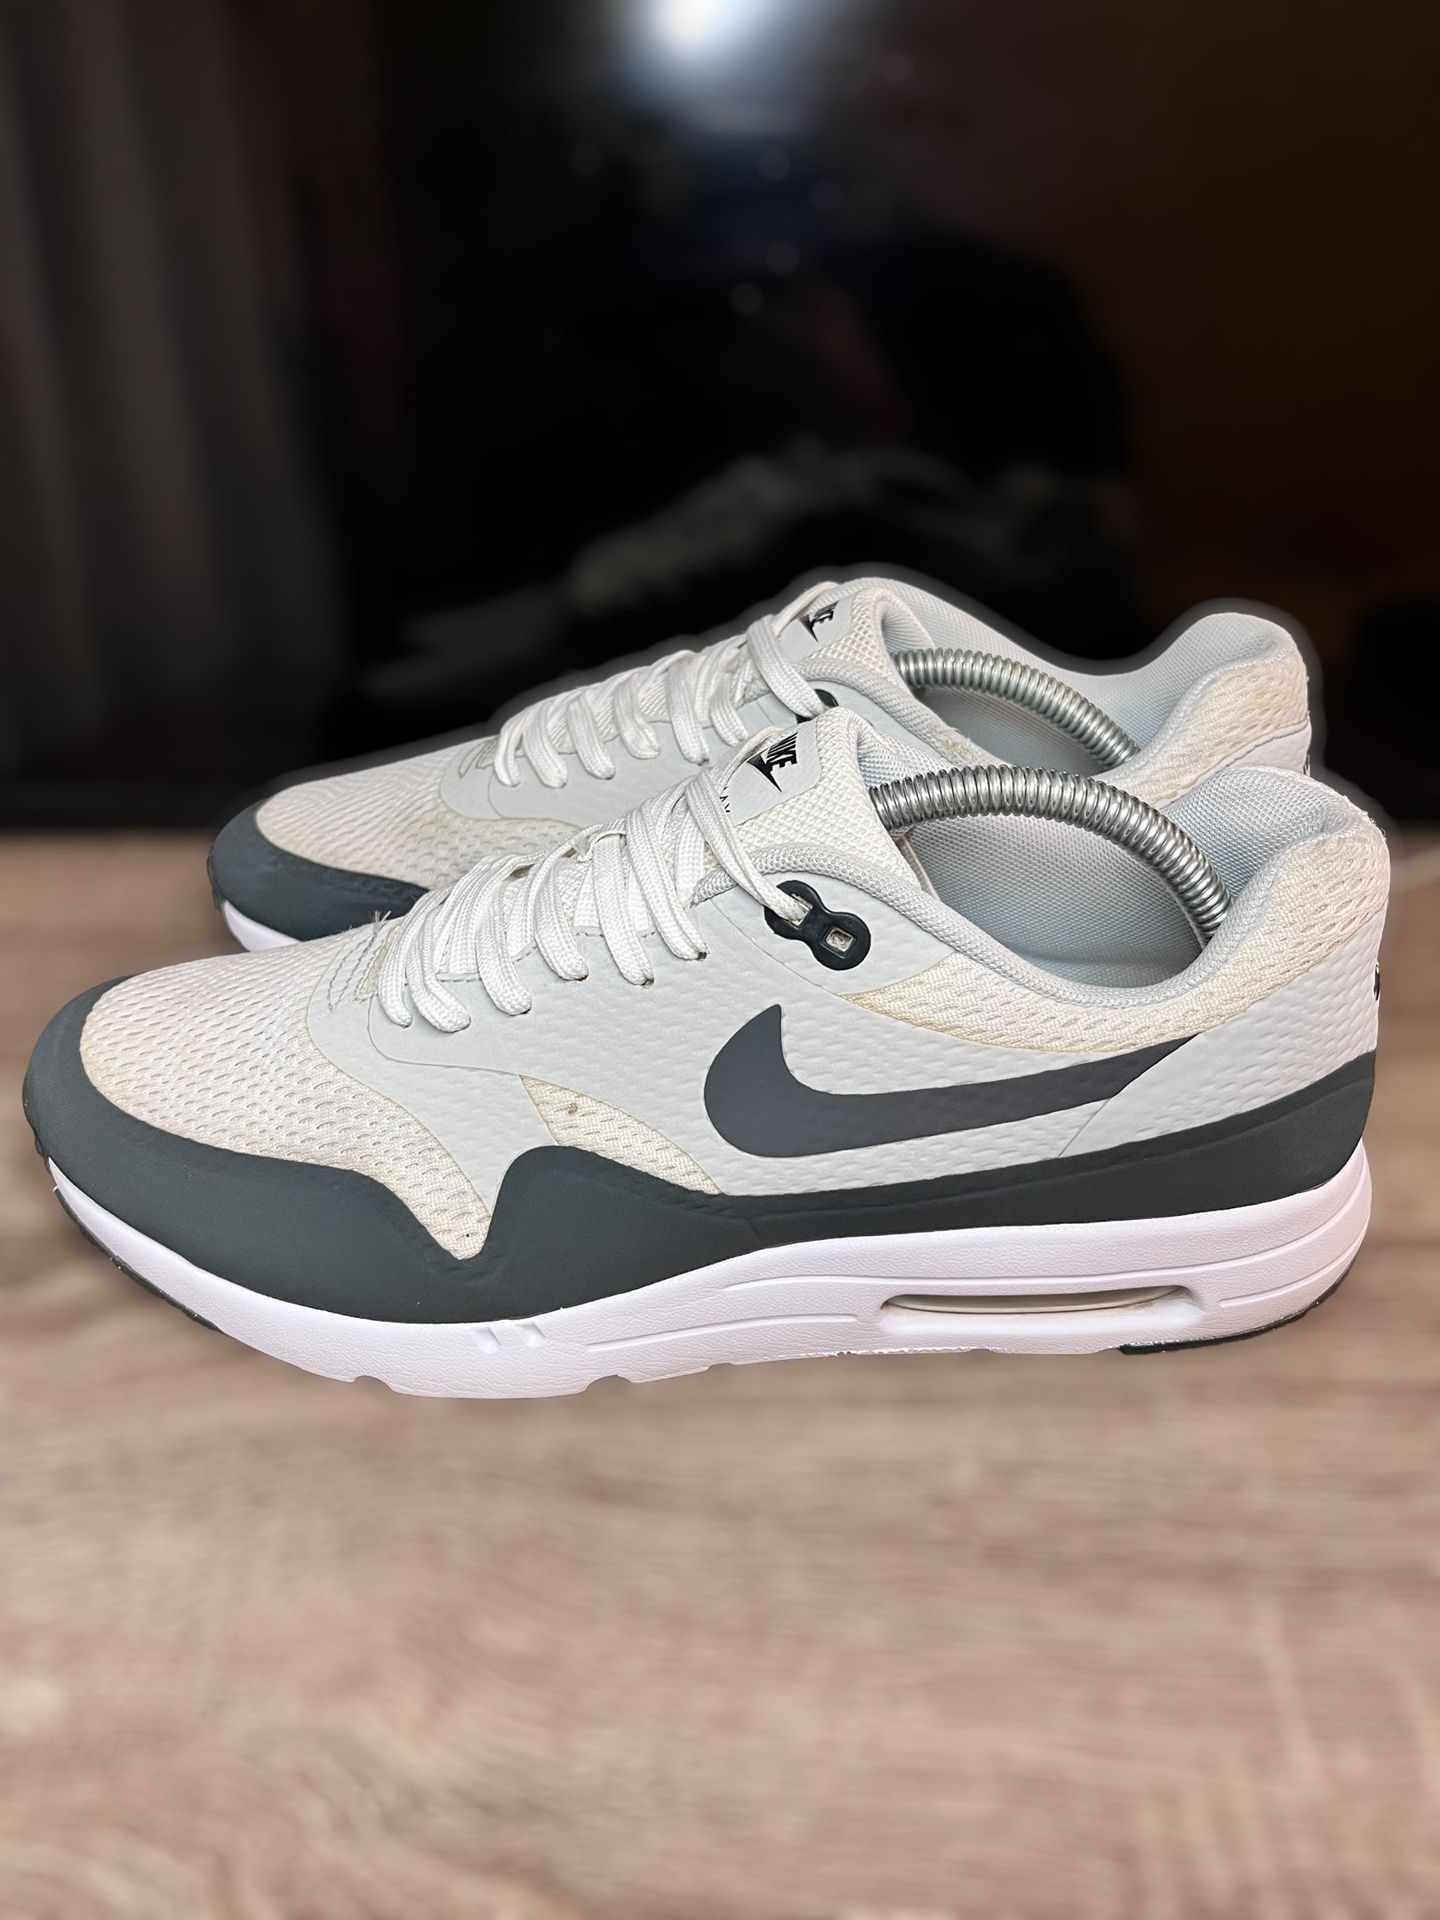 Nike Air Max 1 Ultra WHITE & ANTHRACITE Mens Size 11 for Sale in Los Angeles, CA - OfferUp